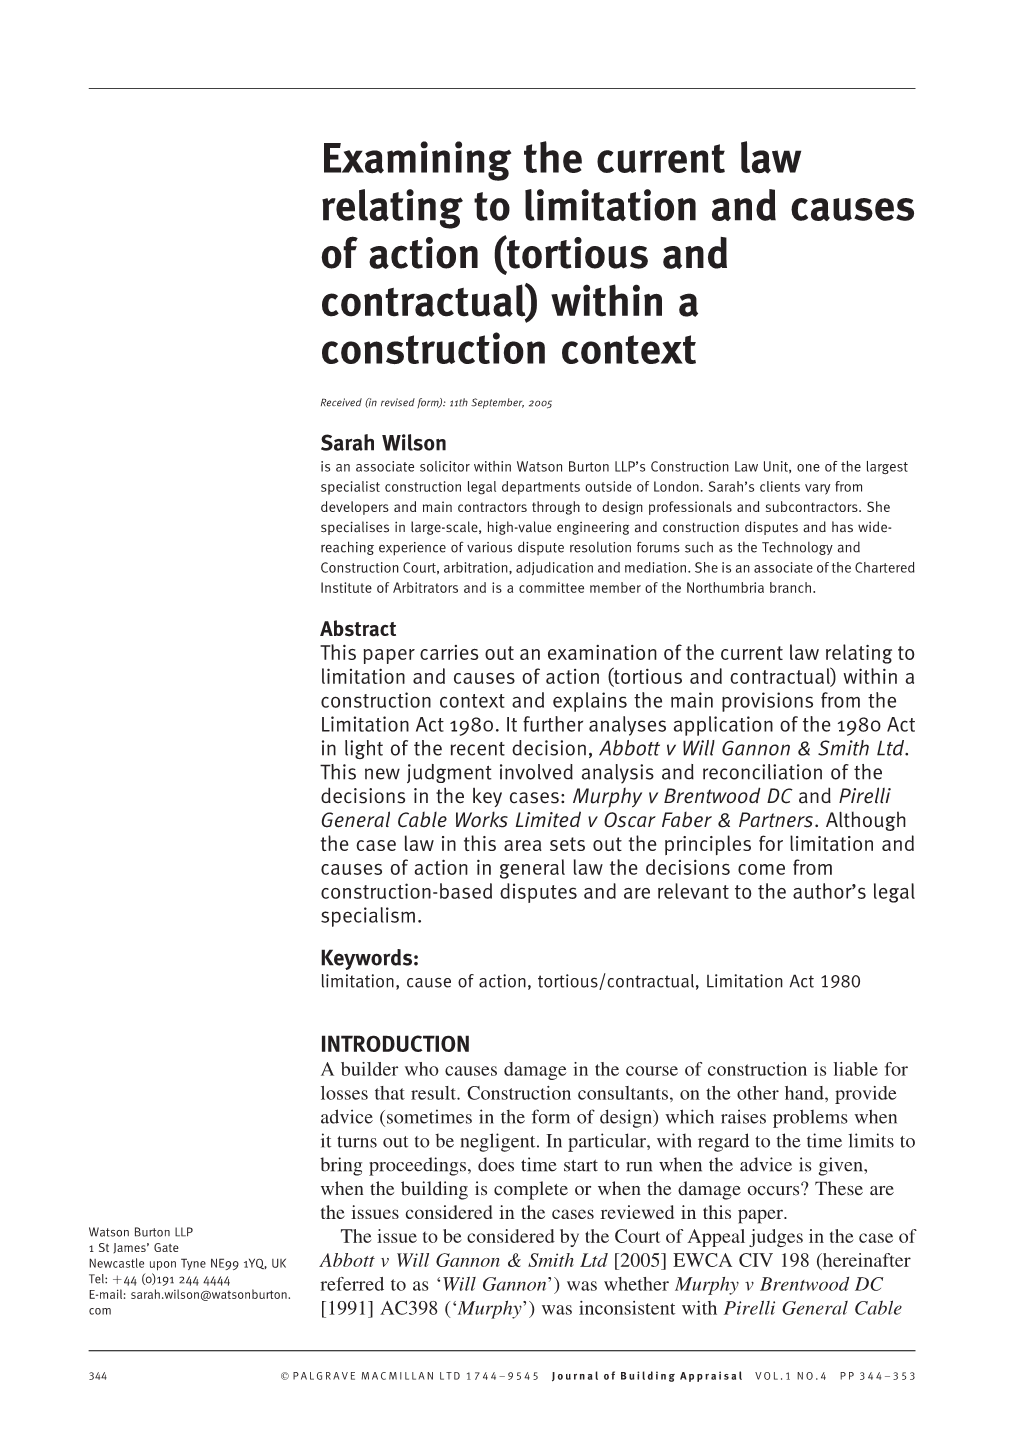 Examining the Current Law Relating to Limitation and Causes of Action (Tortious and Contractual) Within a Construction Context